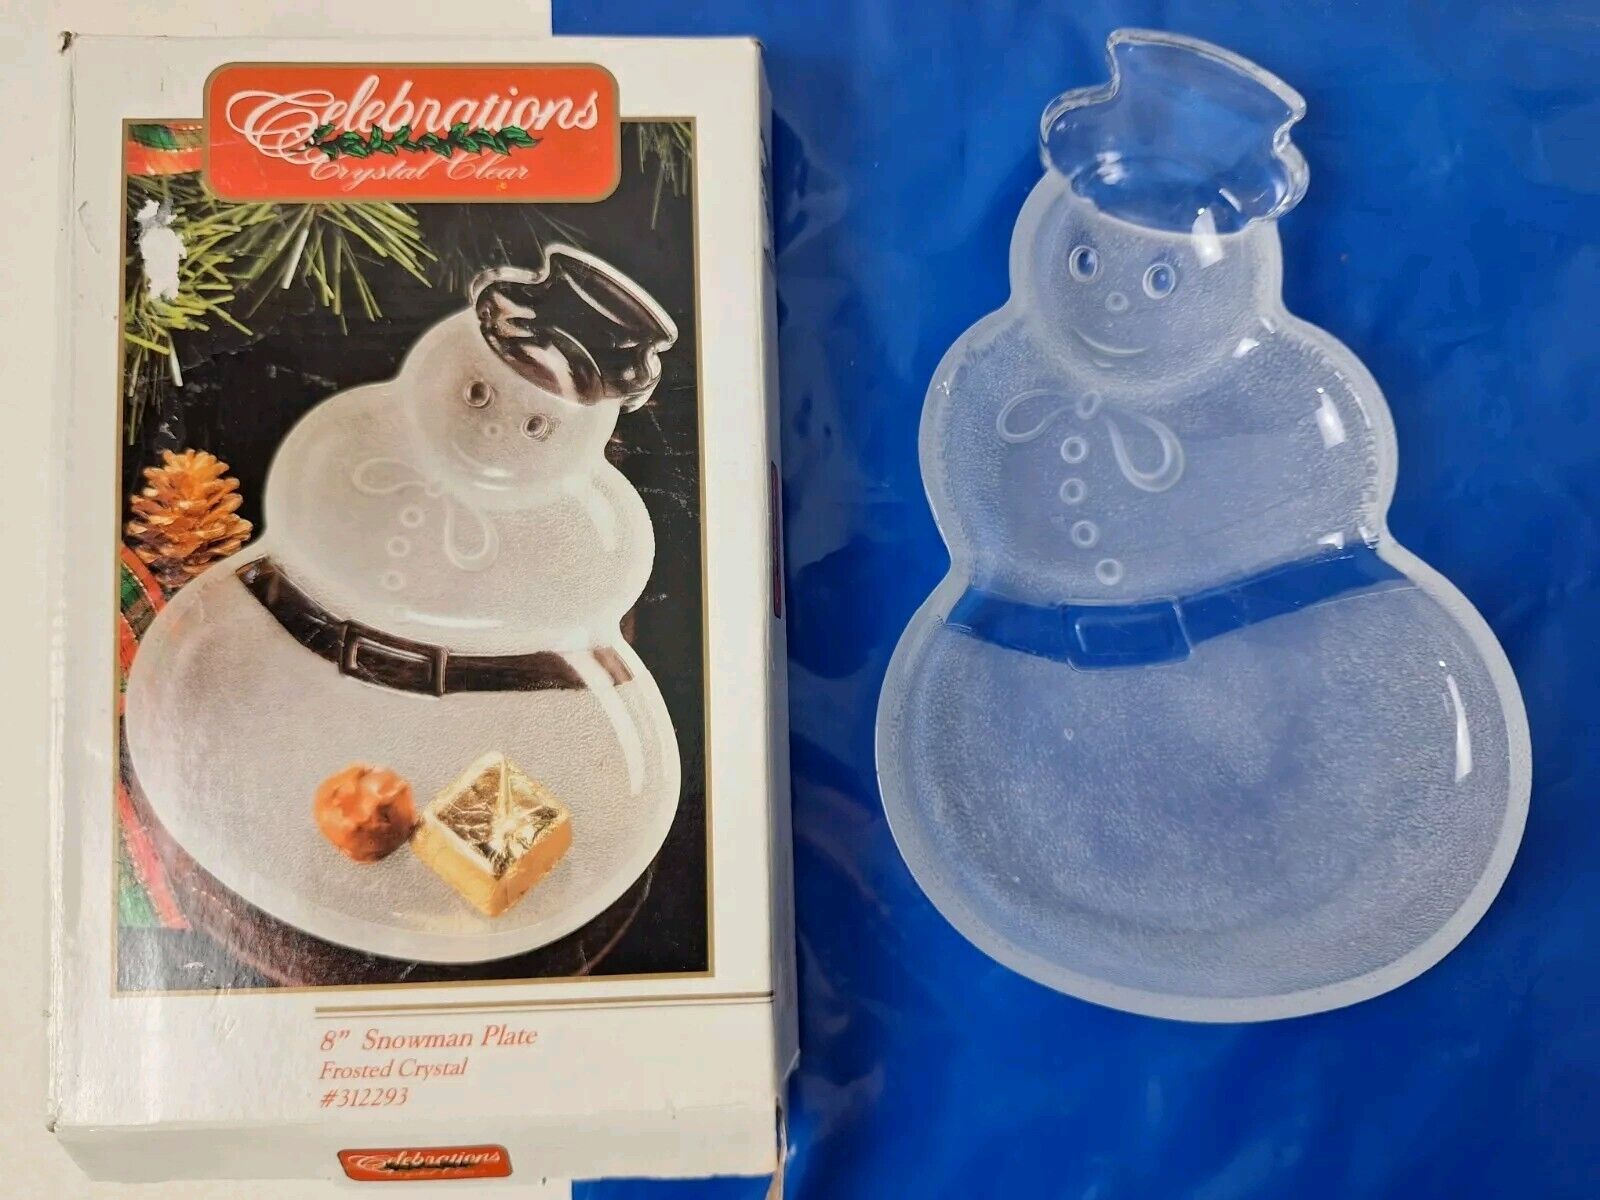 Cute Vintage Glass Snowman Shaped Glass Candy Dish / Winter Christmas Decor